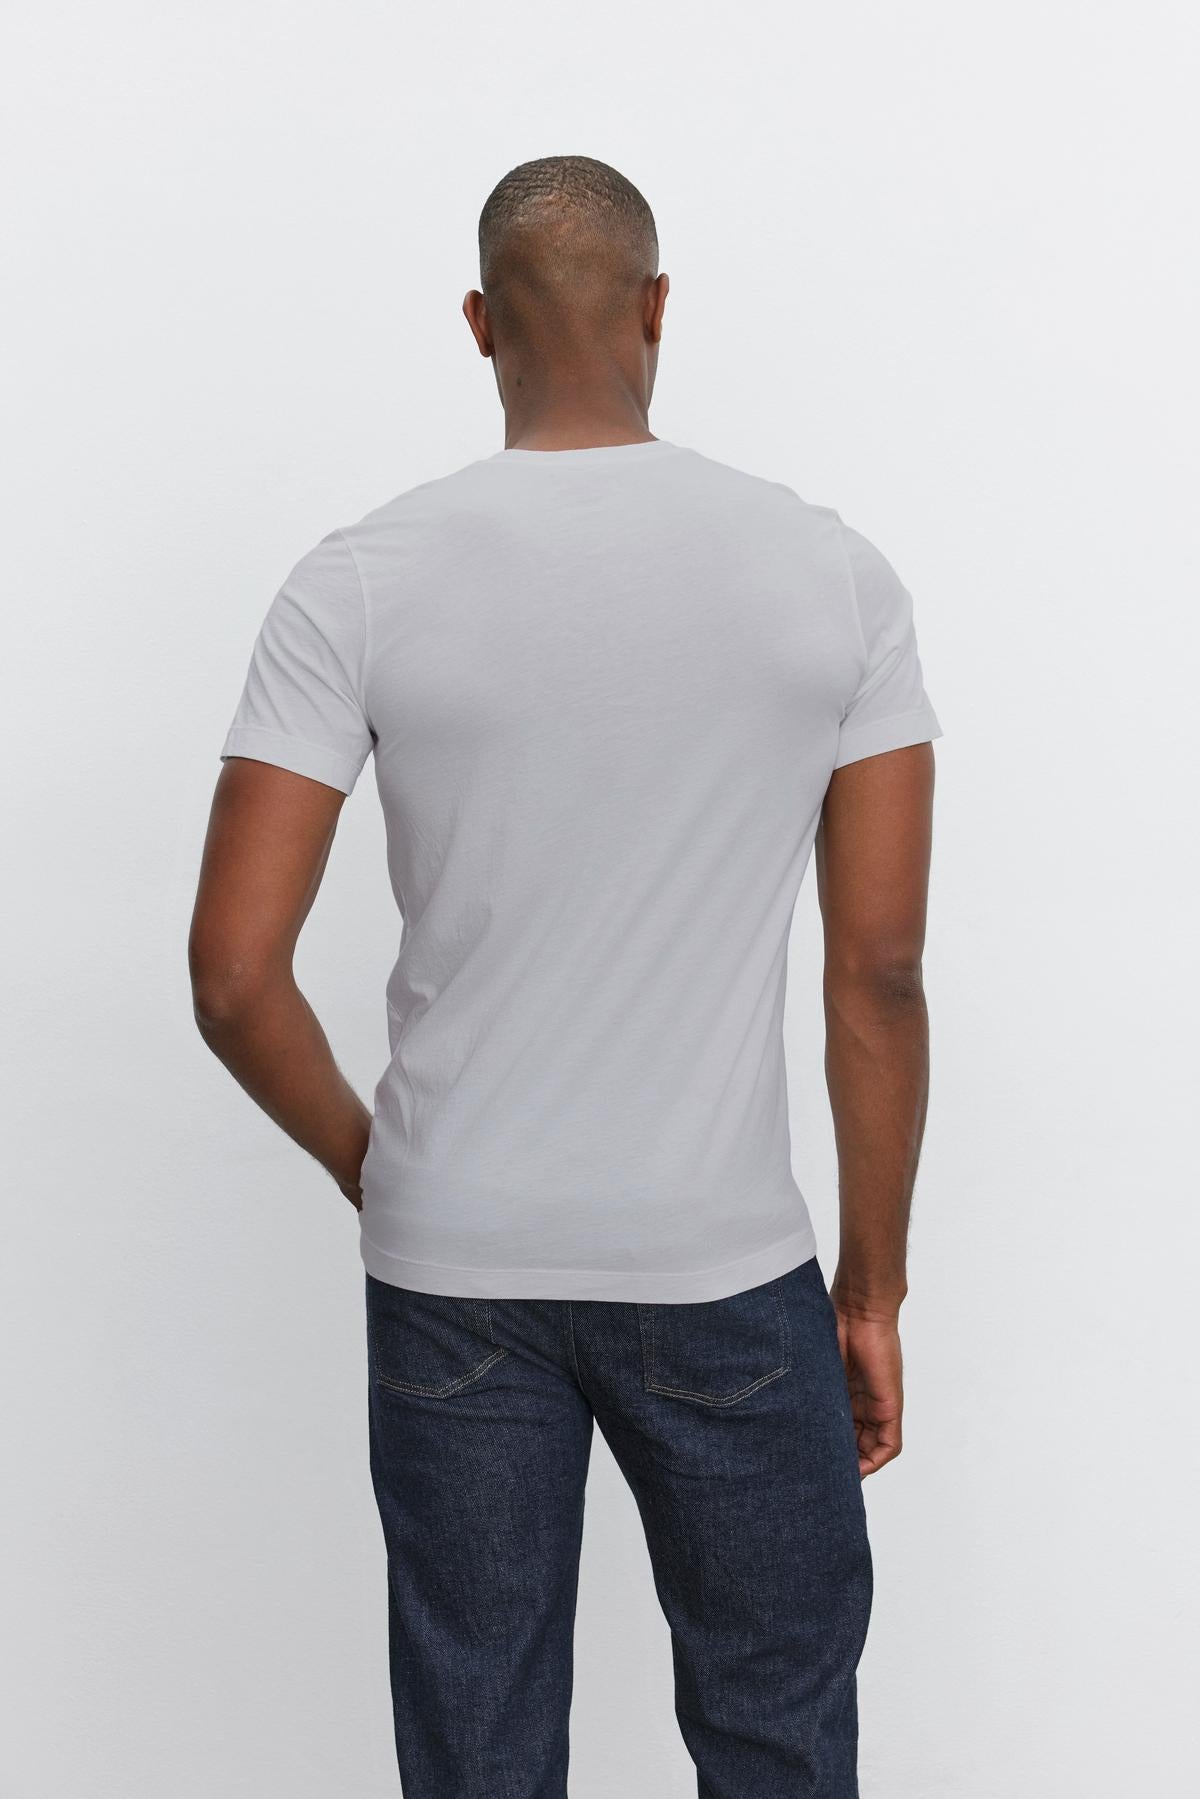   Man wearing a Velvet by Graham & Spencer SAMSEN TEE with a v-neckline and dark blue jeans, standing with his back to the camera against a plain white background. 